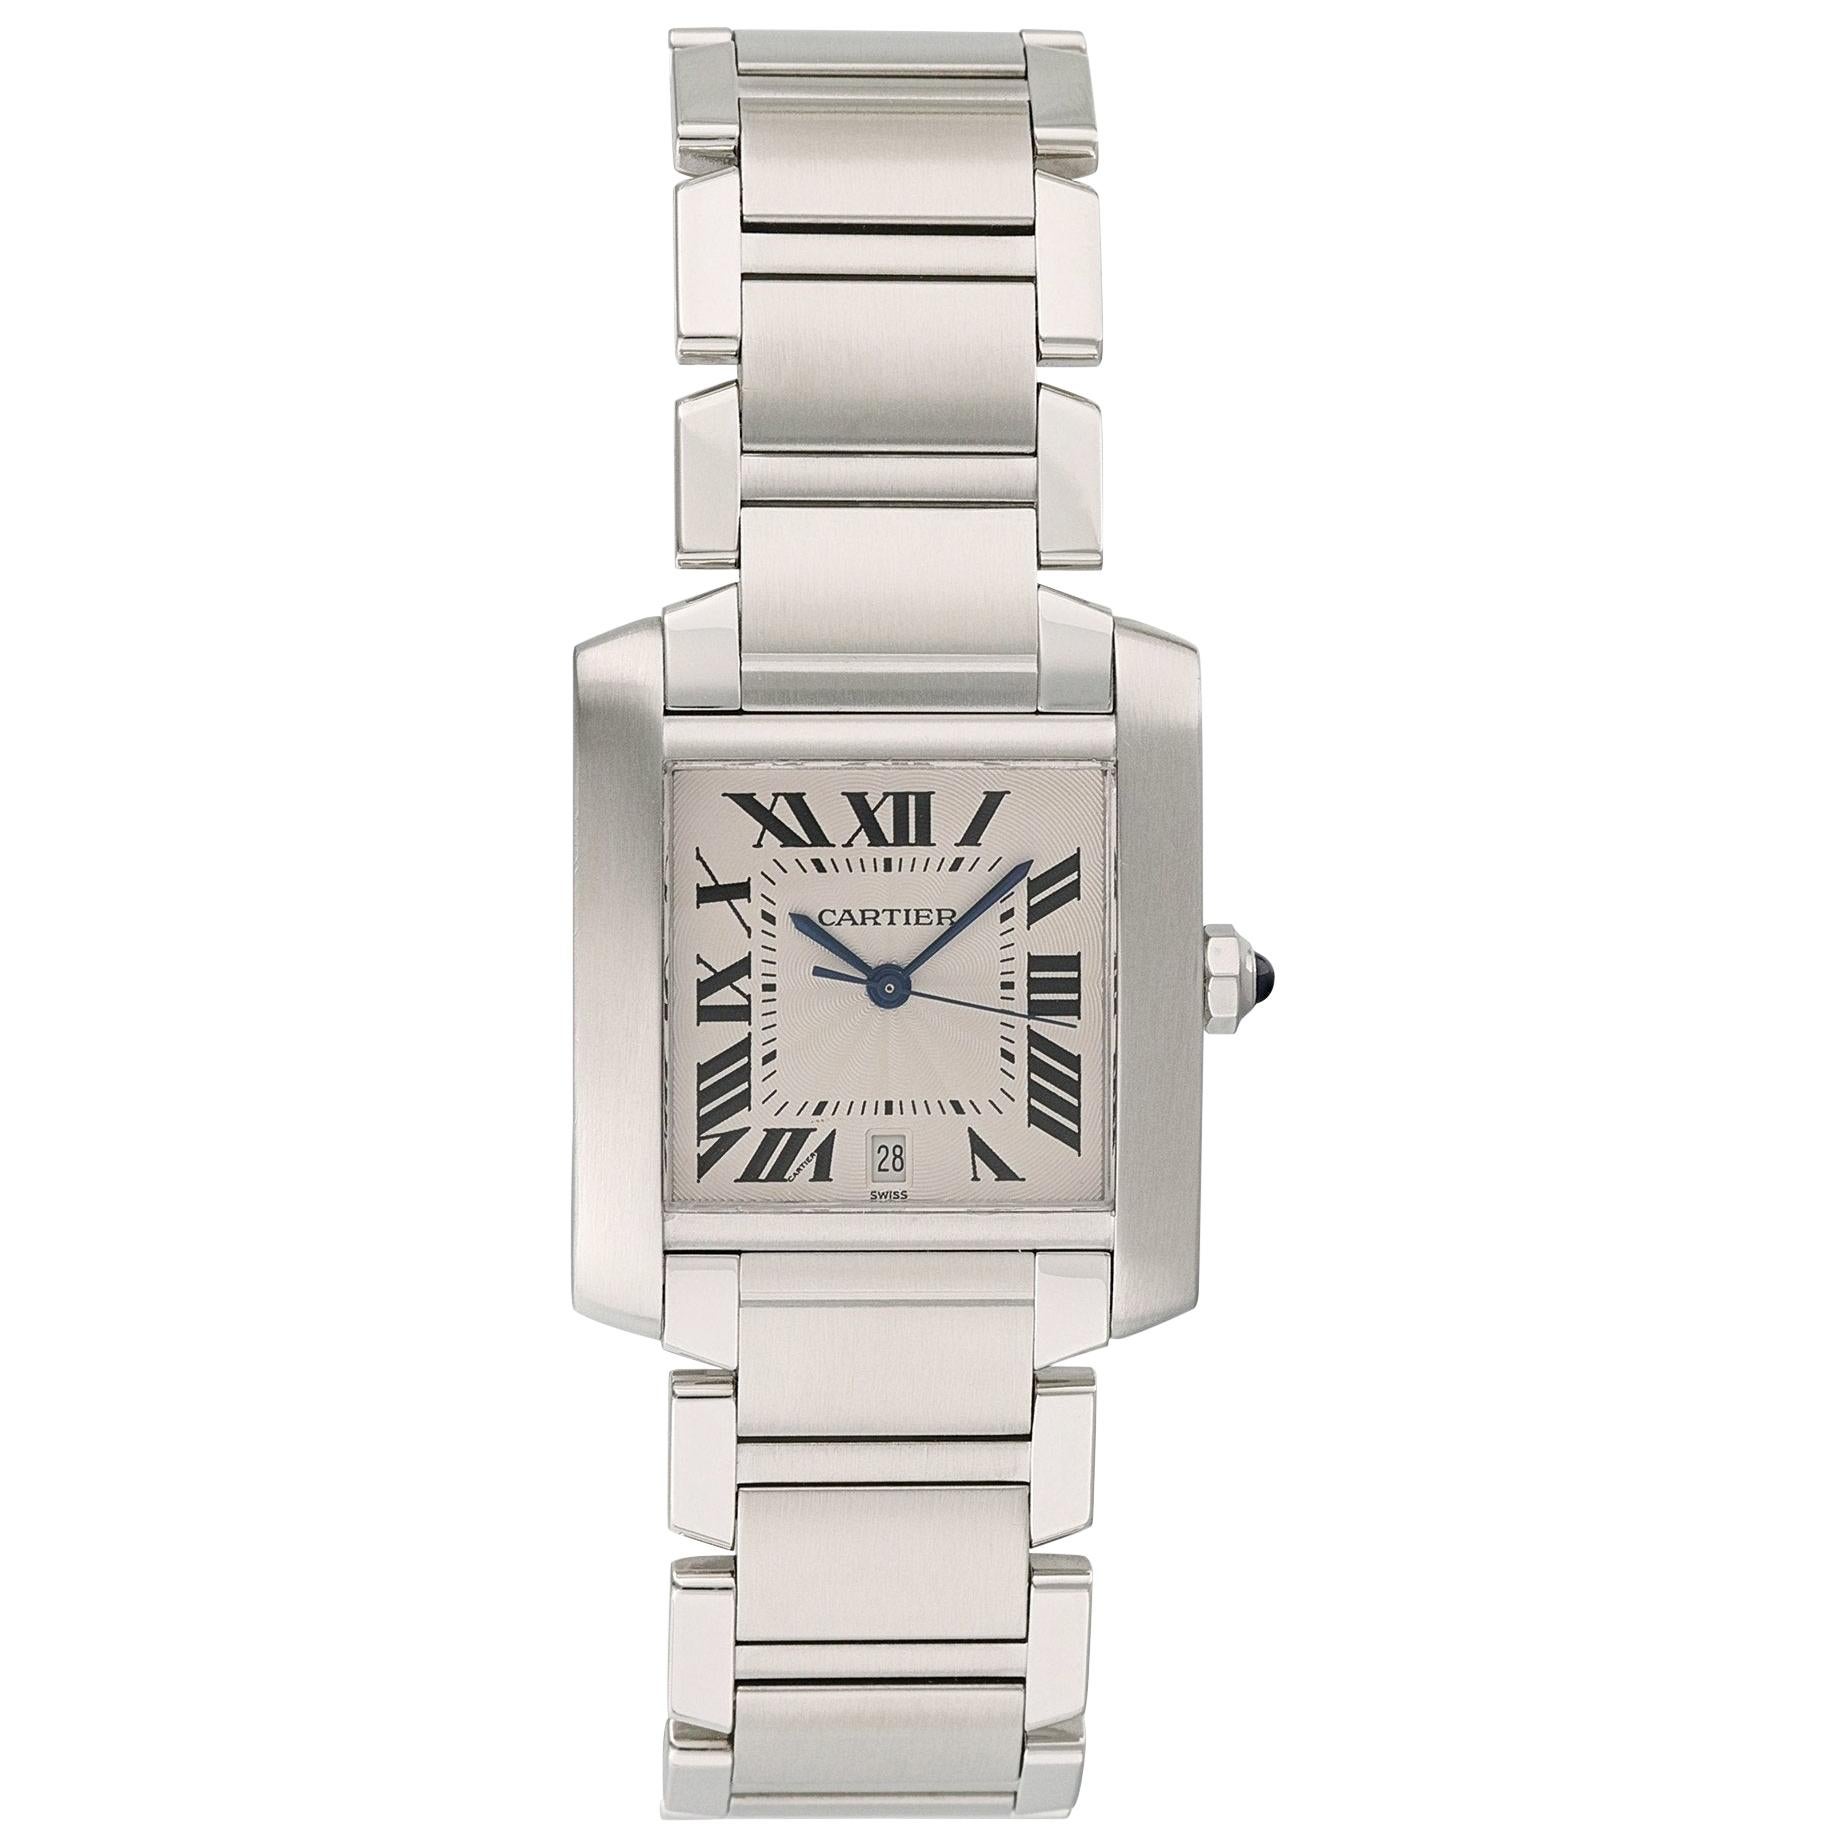 Cartier Tank Francaise 2302 Men's Watch For Sale at 1stDibs